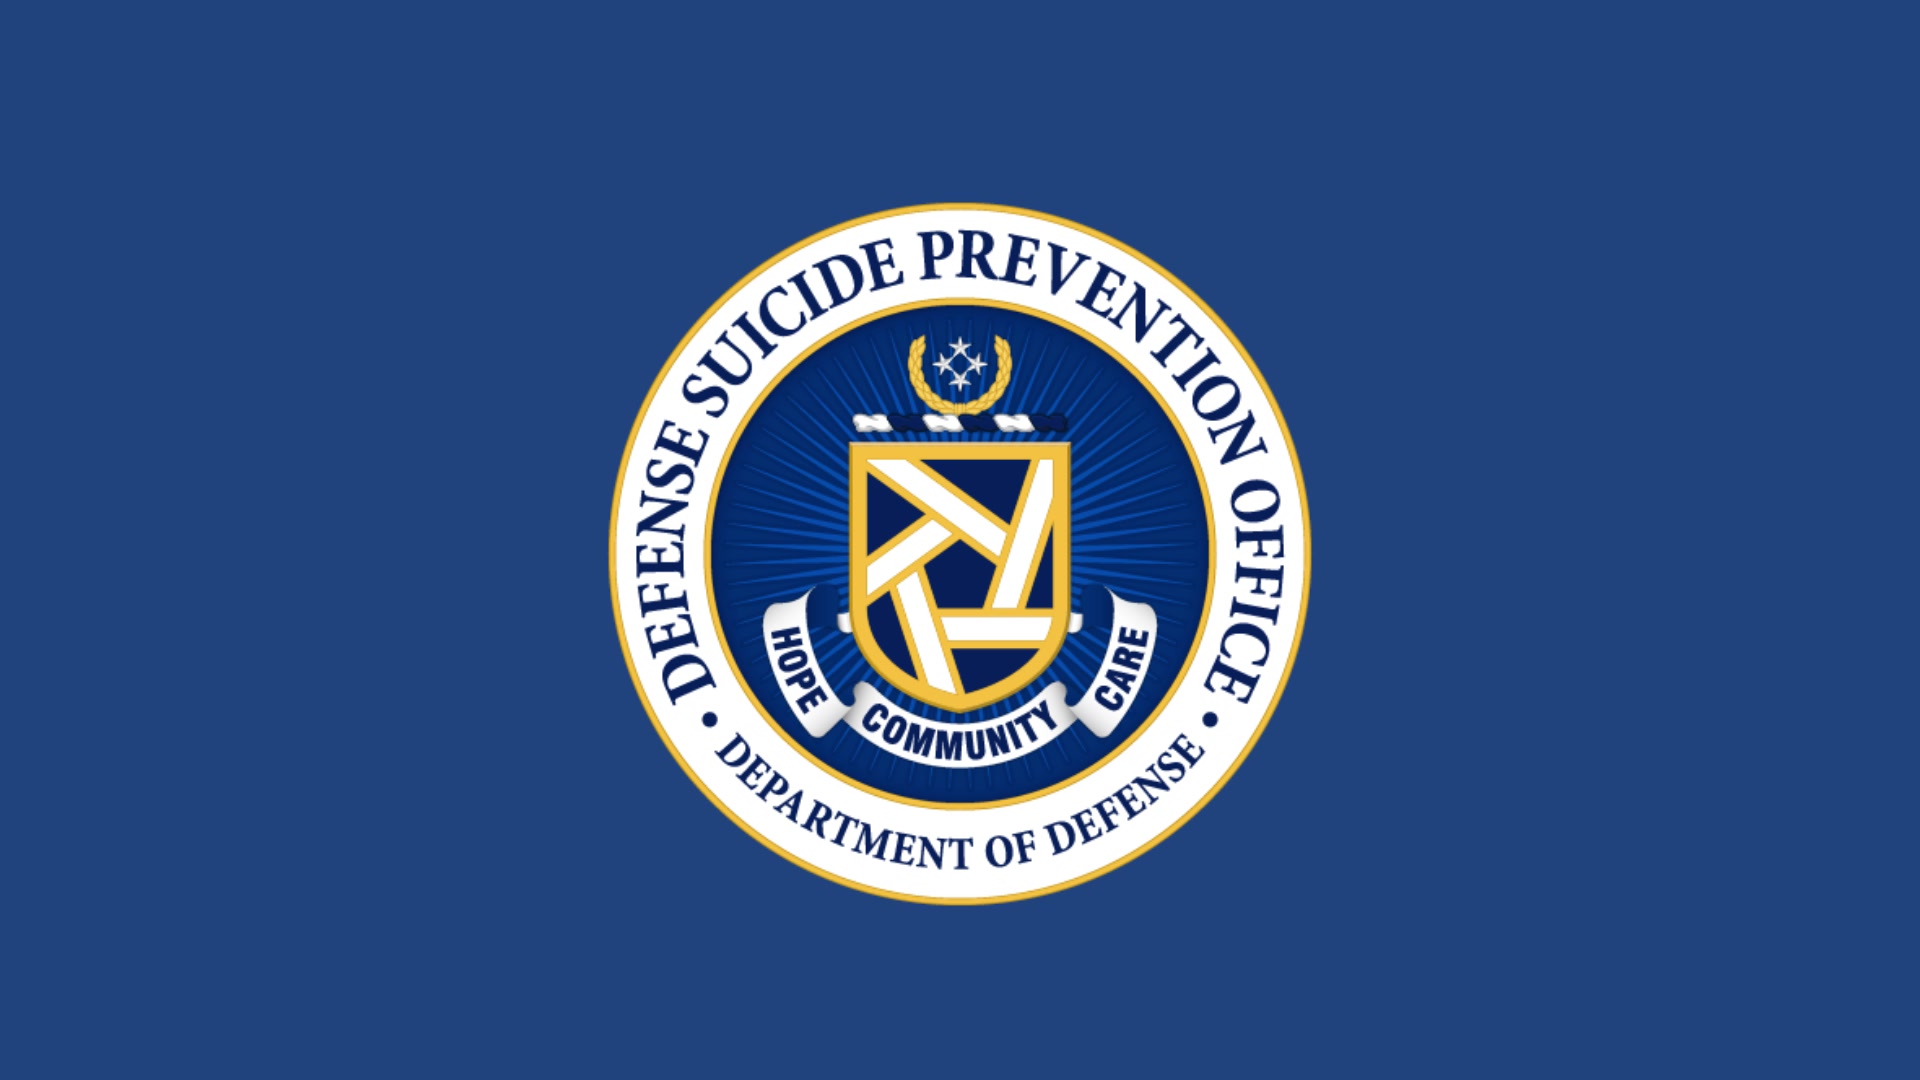 logo with words "Defense Suicide Prevention Office"